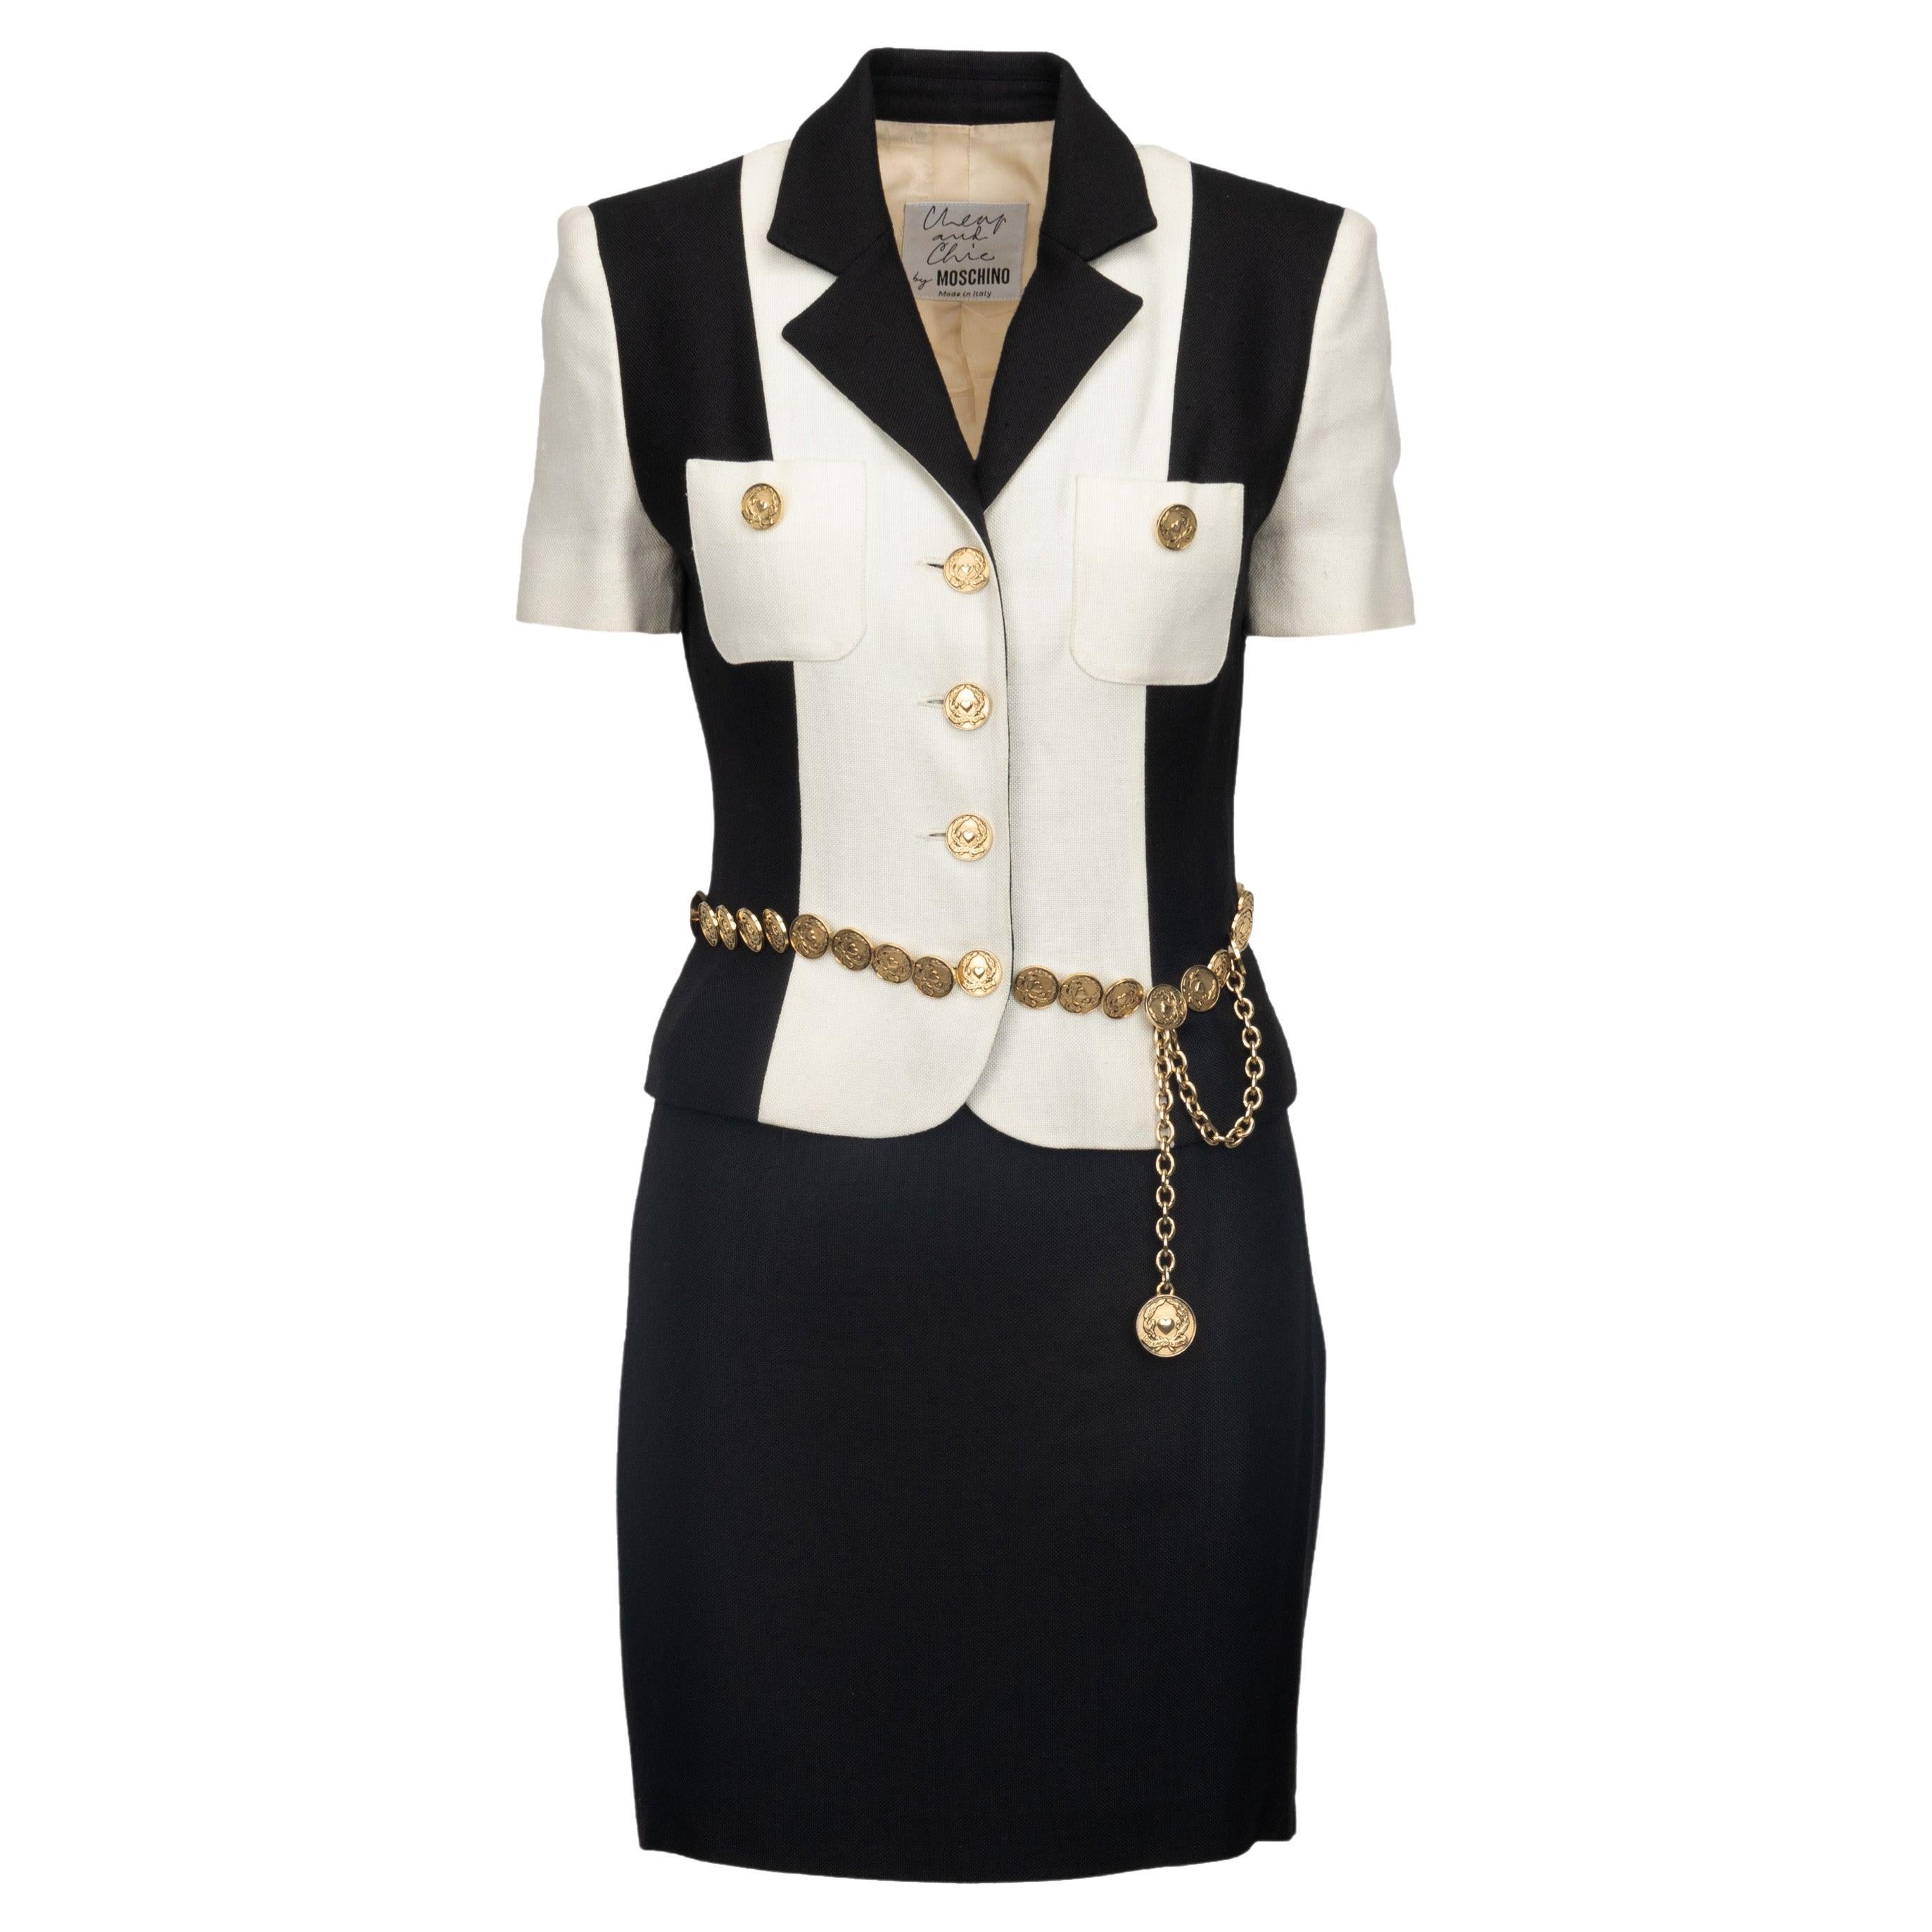 Moschino Cheap and Chic Coin Belt Jacket and Skirt Set For Sale